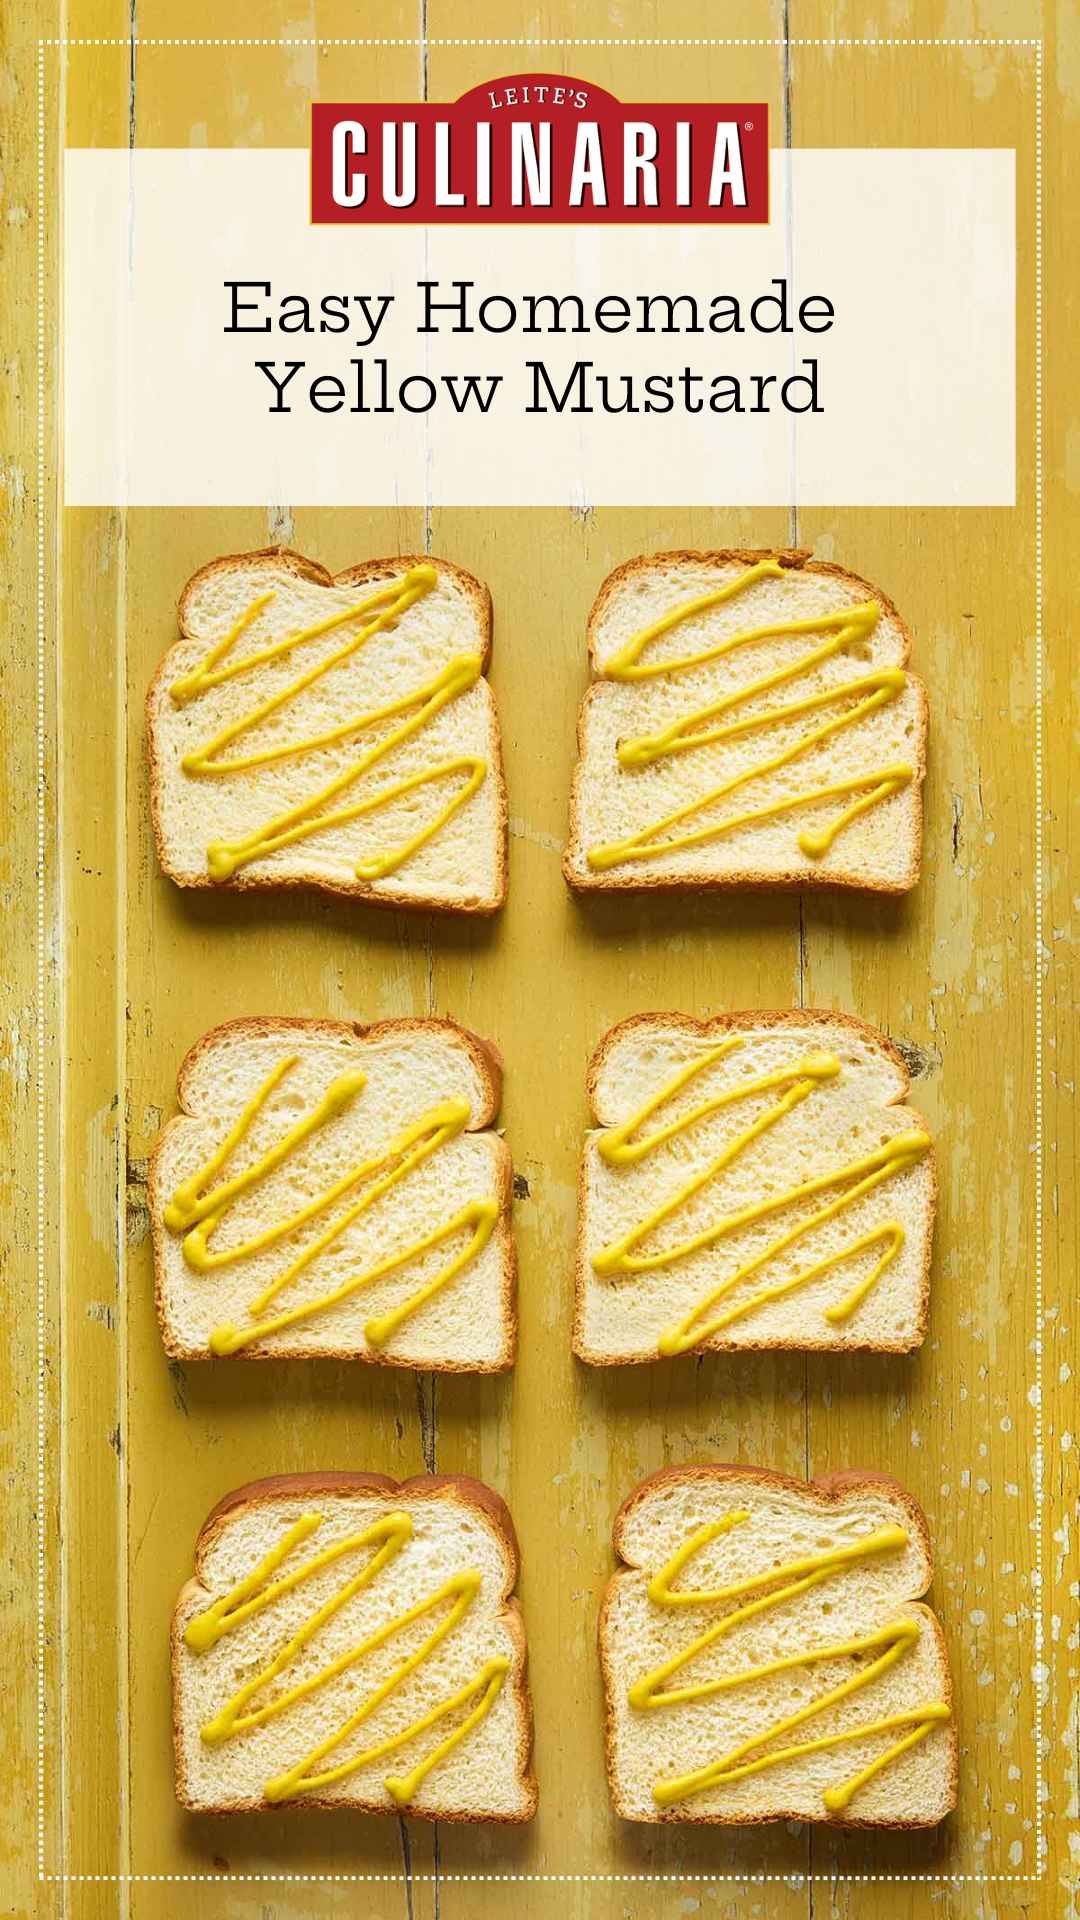 Six slices of white bread with mustard squiggles on each slice.